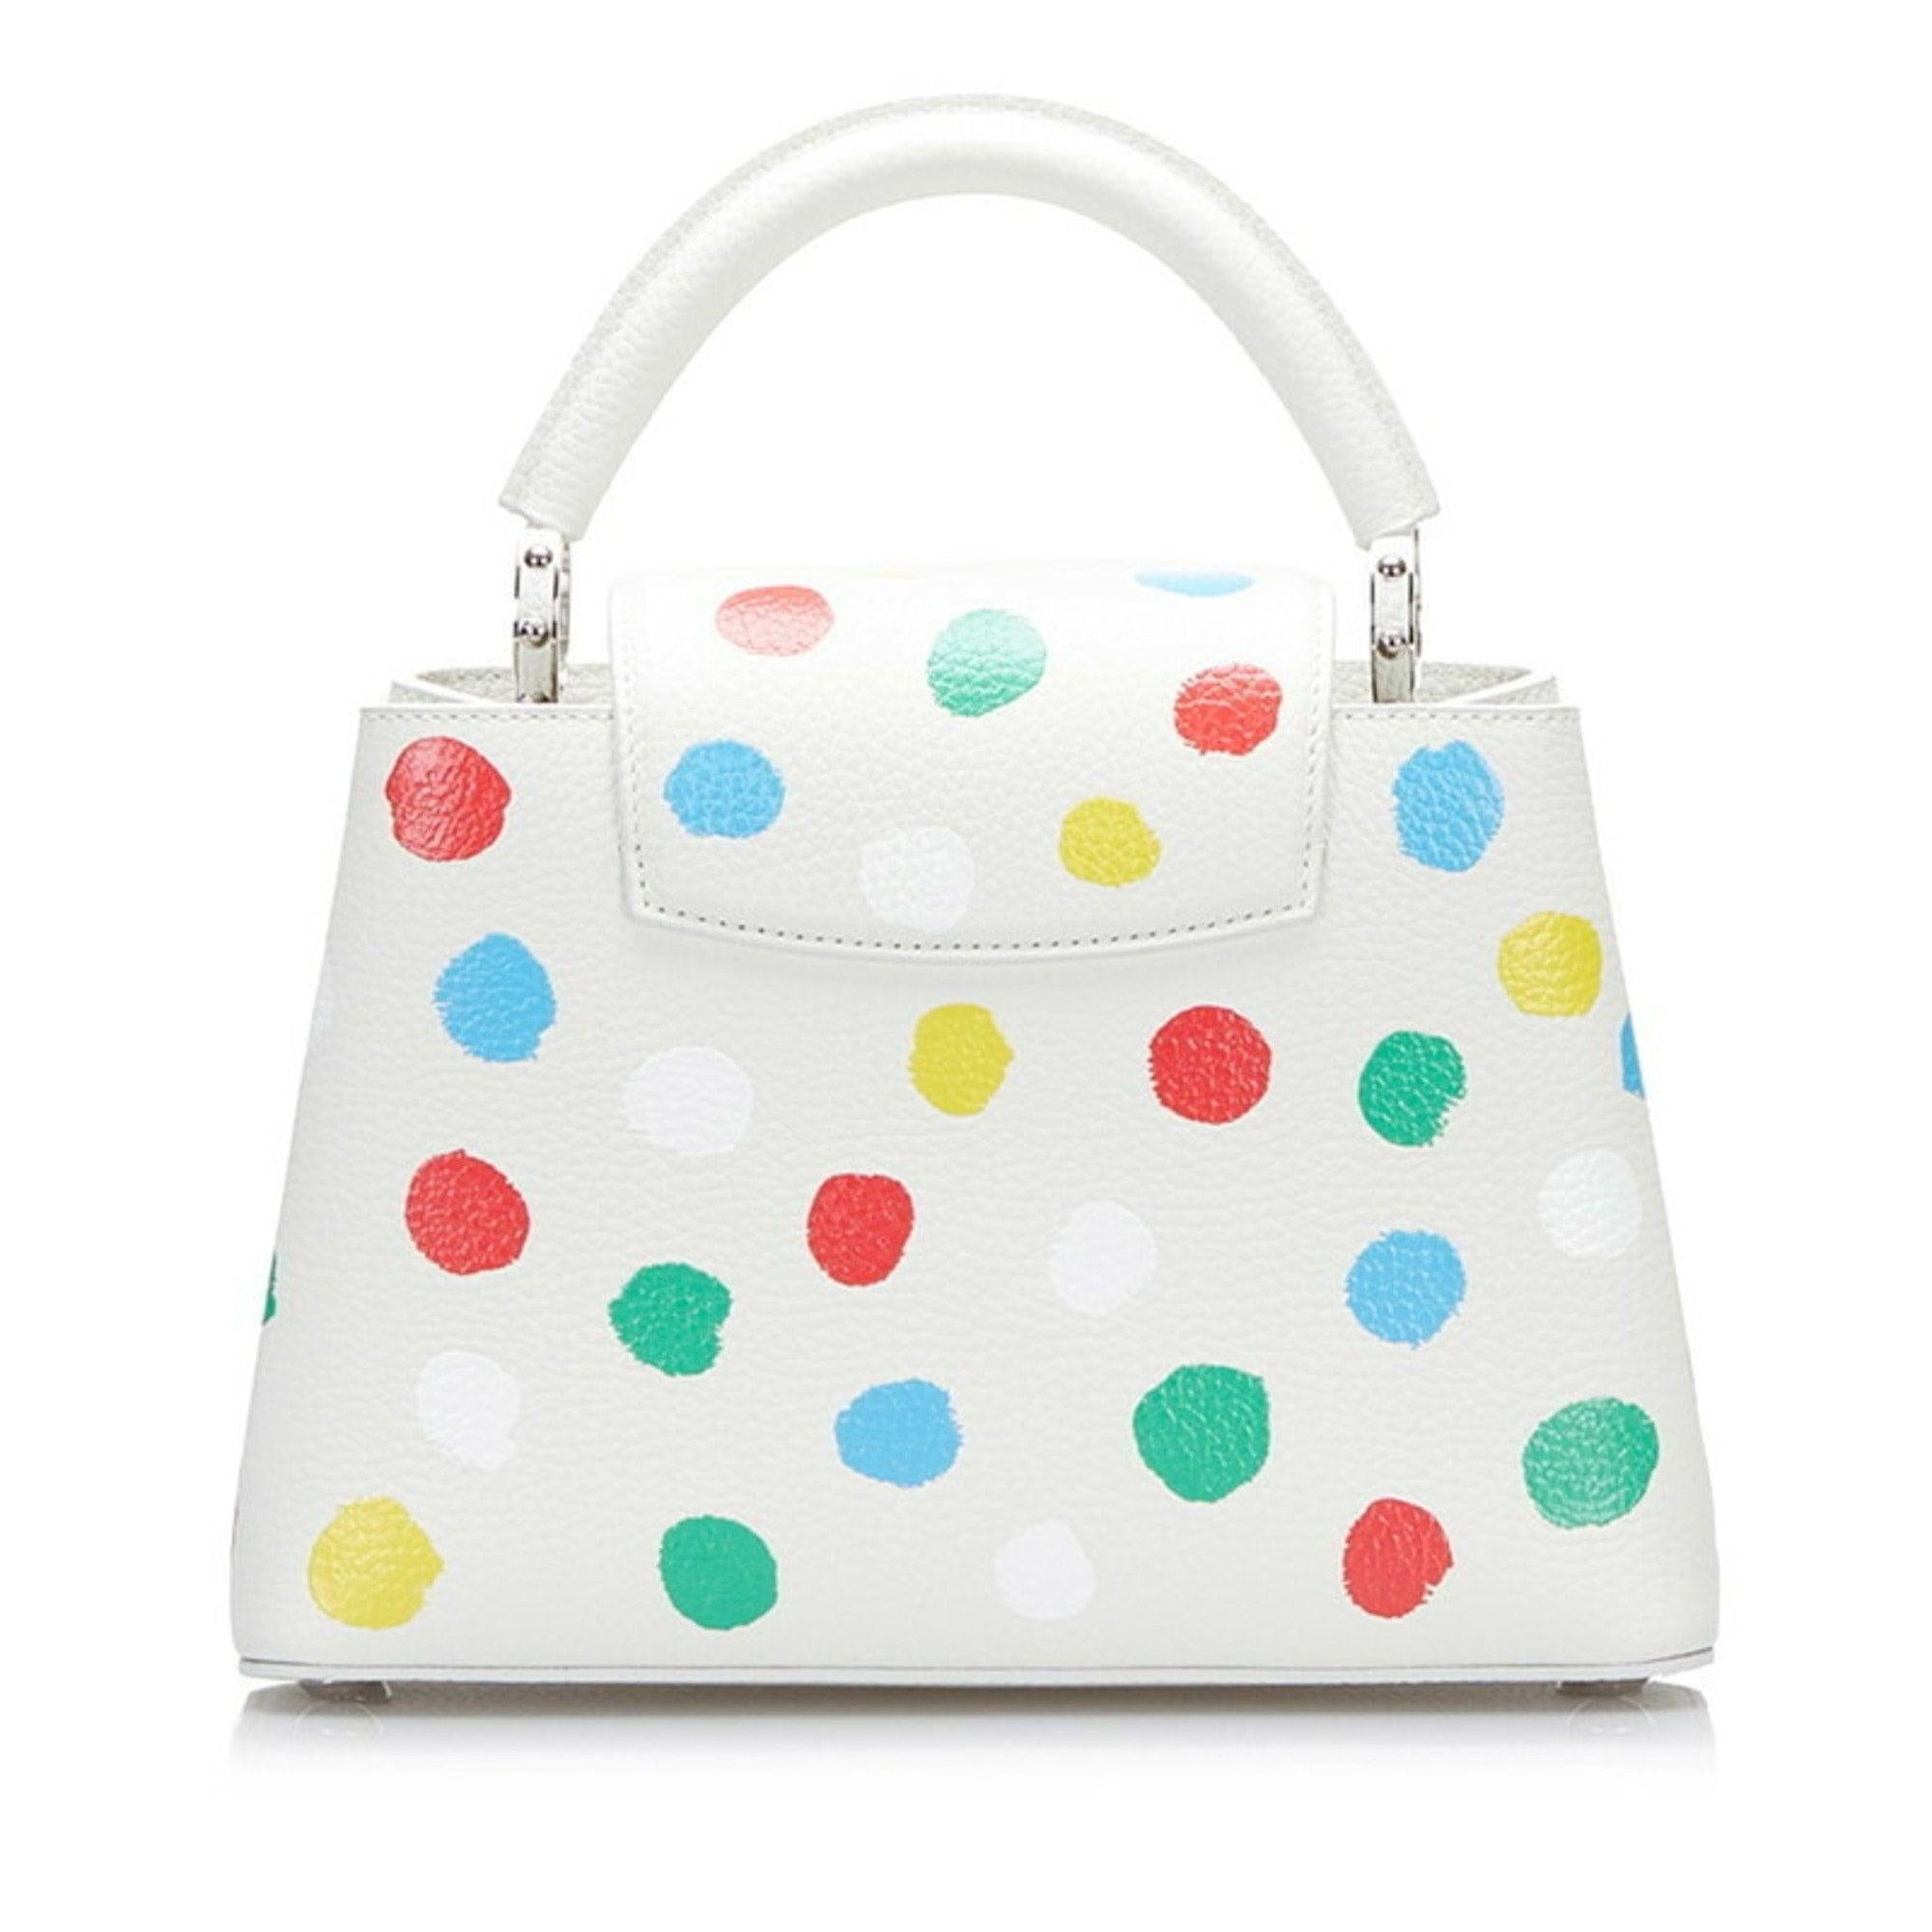 Louis Vuitton x Yayoi Kusama Capucine Painted Handbag Shoulder Bag In Good Condition For Sale In London, GB